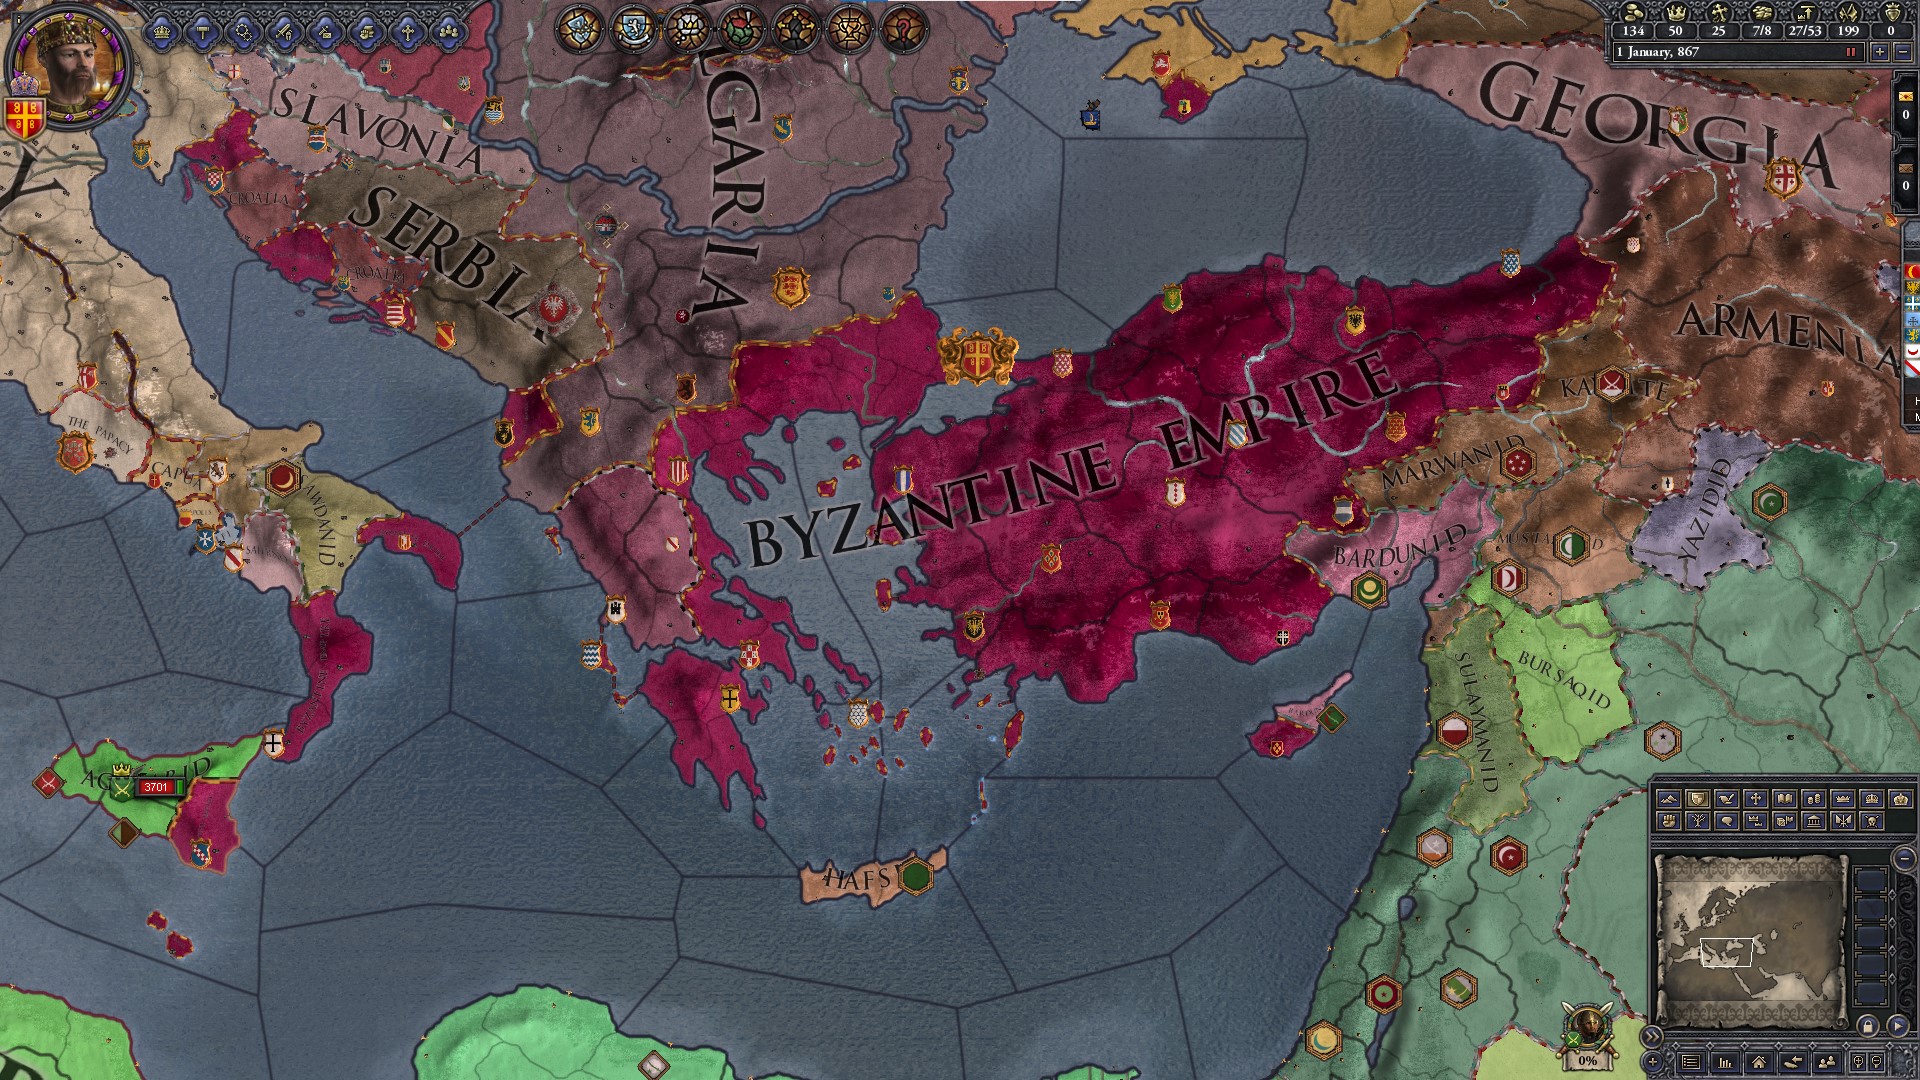 crusader kings 2 how to play byzantine empire guide